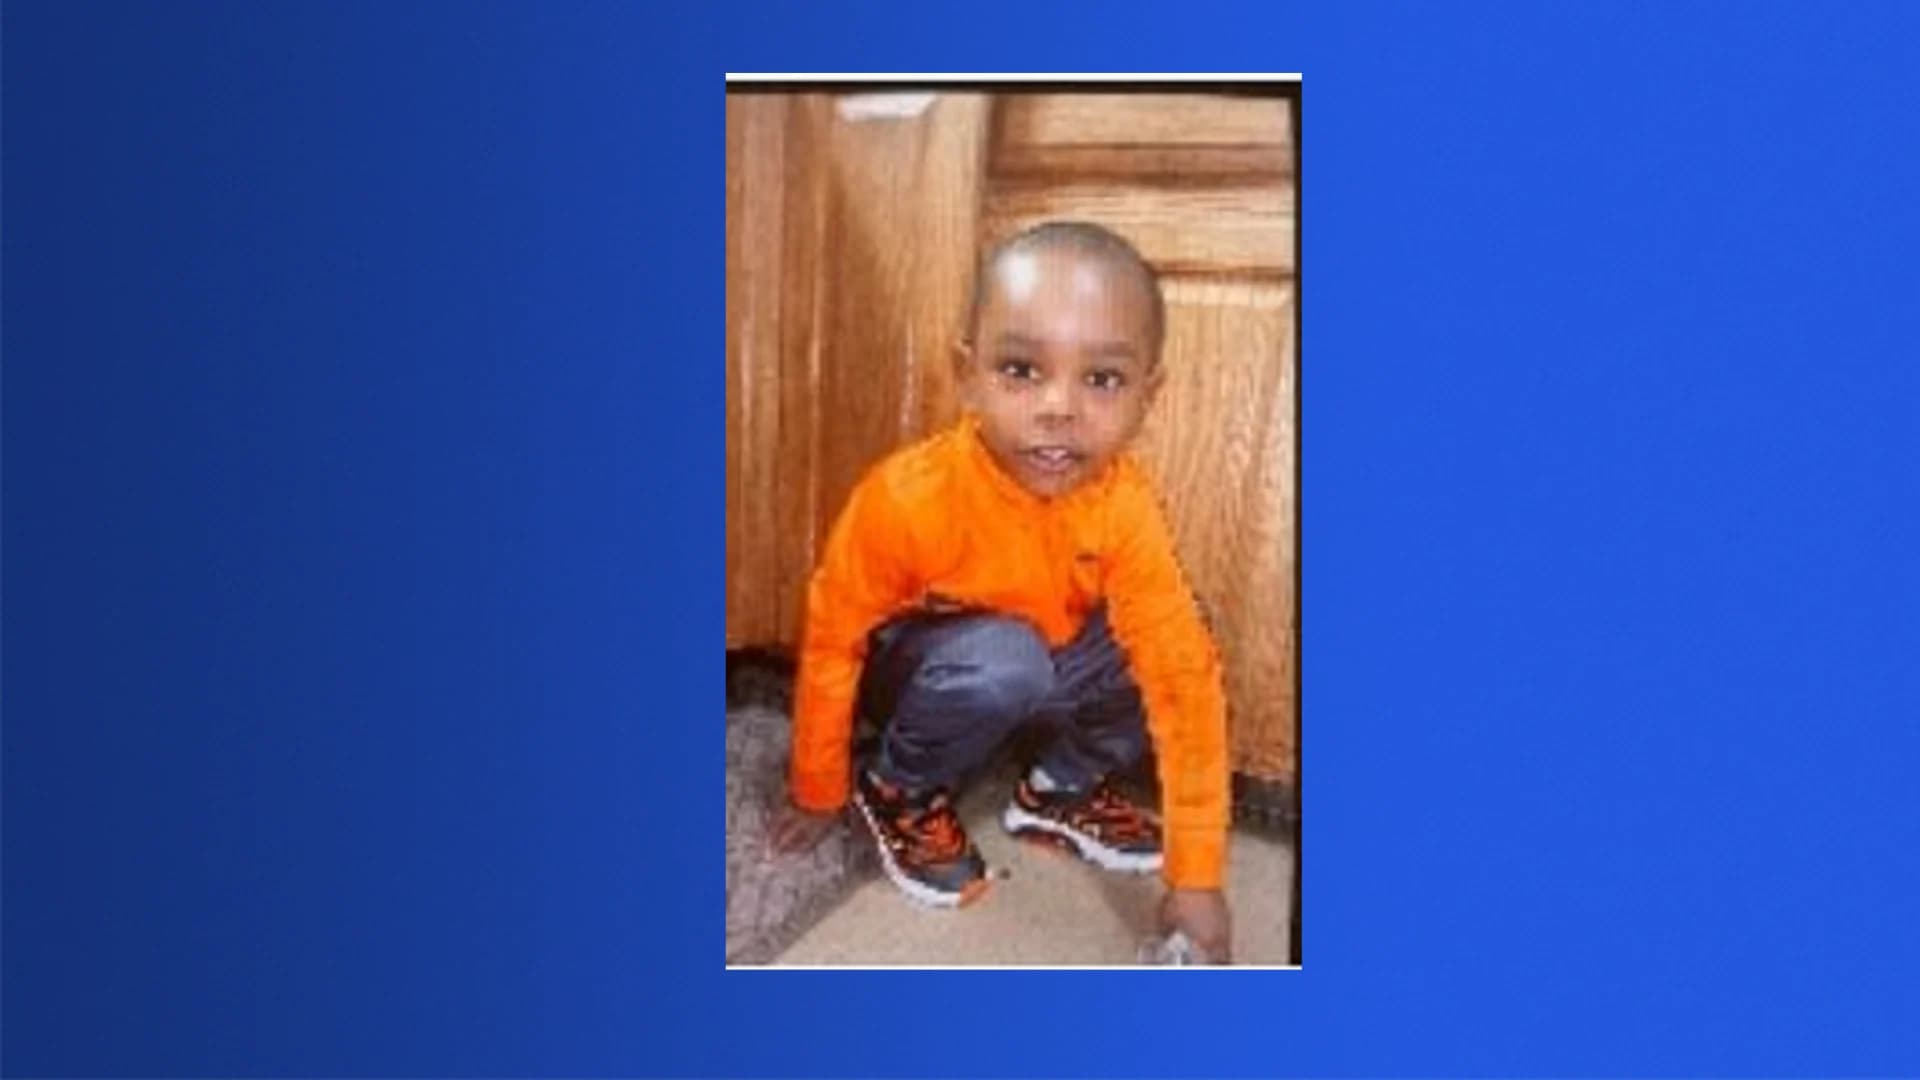 Police: Missing 4-year-old boy found; Amber Alert canceled